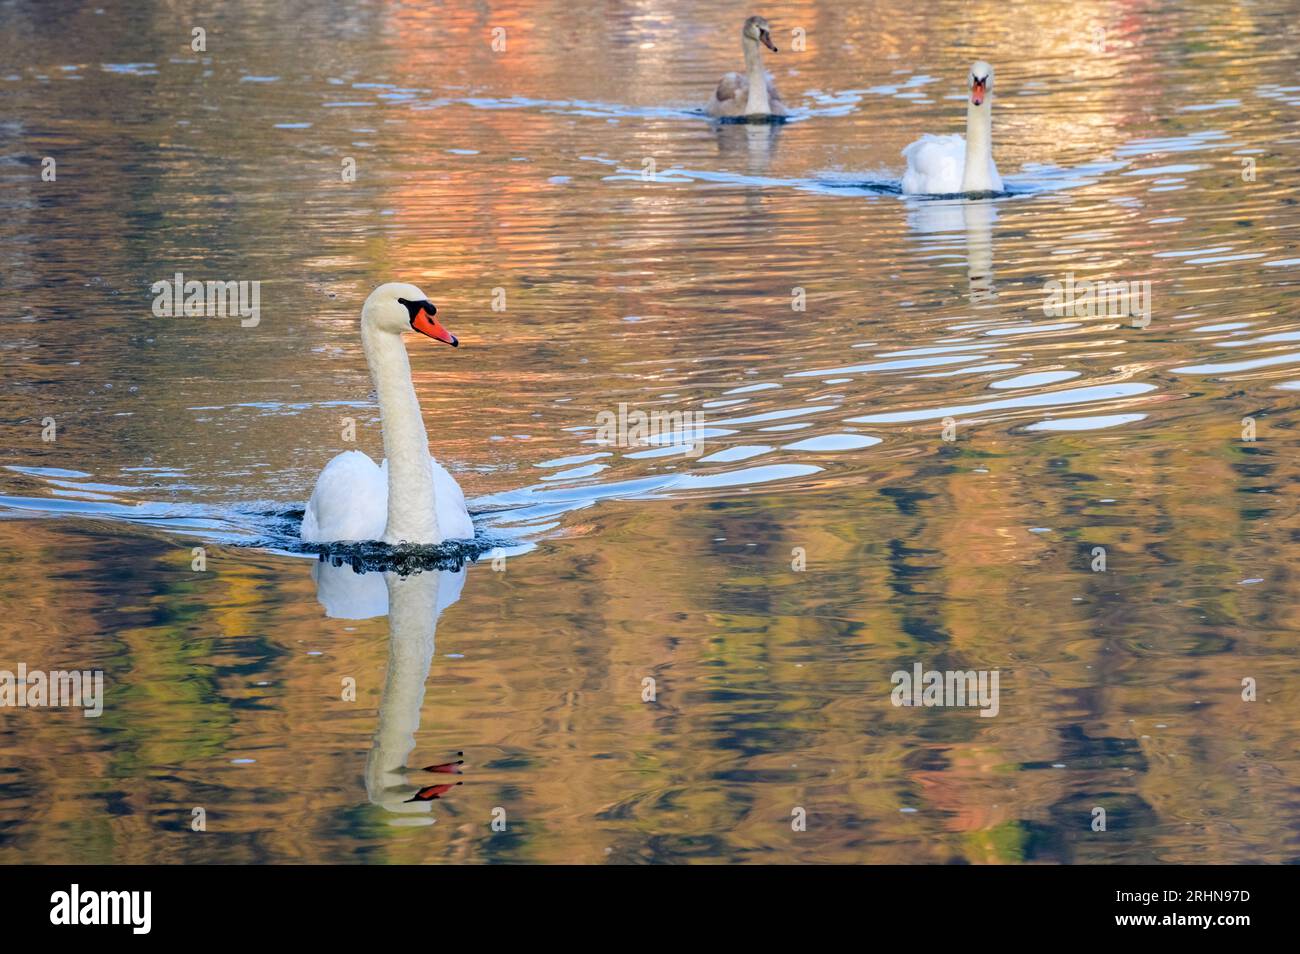 Mute Swan (Cygnus olor) swimming in autumn colored water of the Moesel river, Germany. Stock Photo